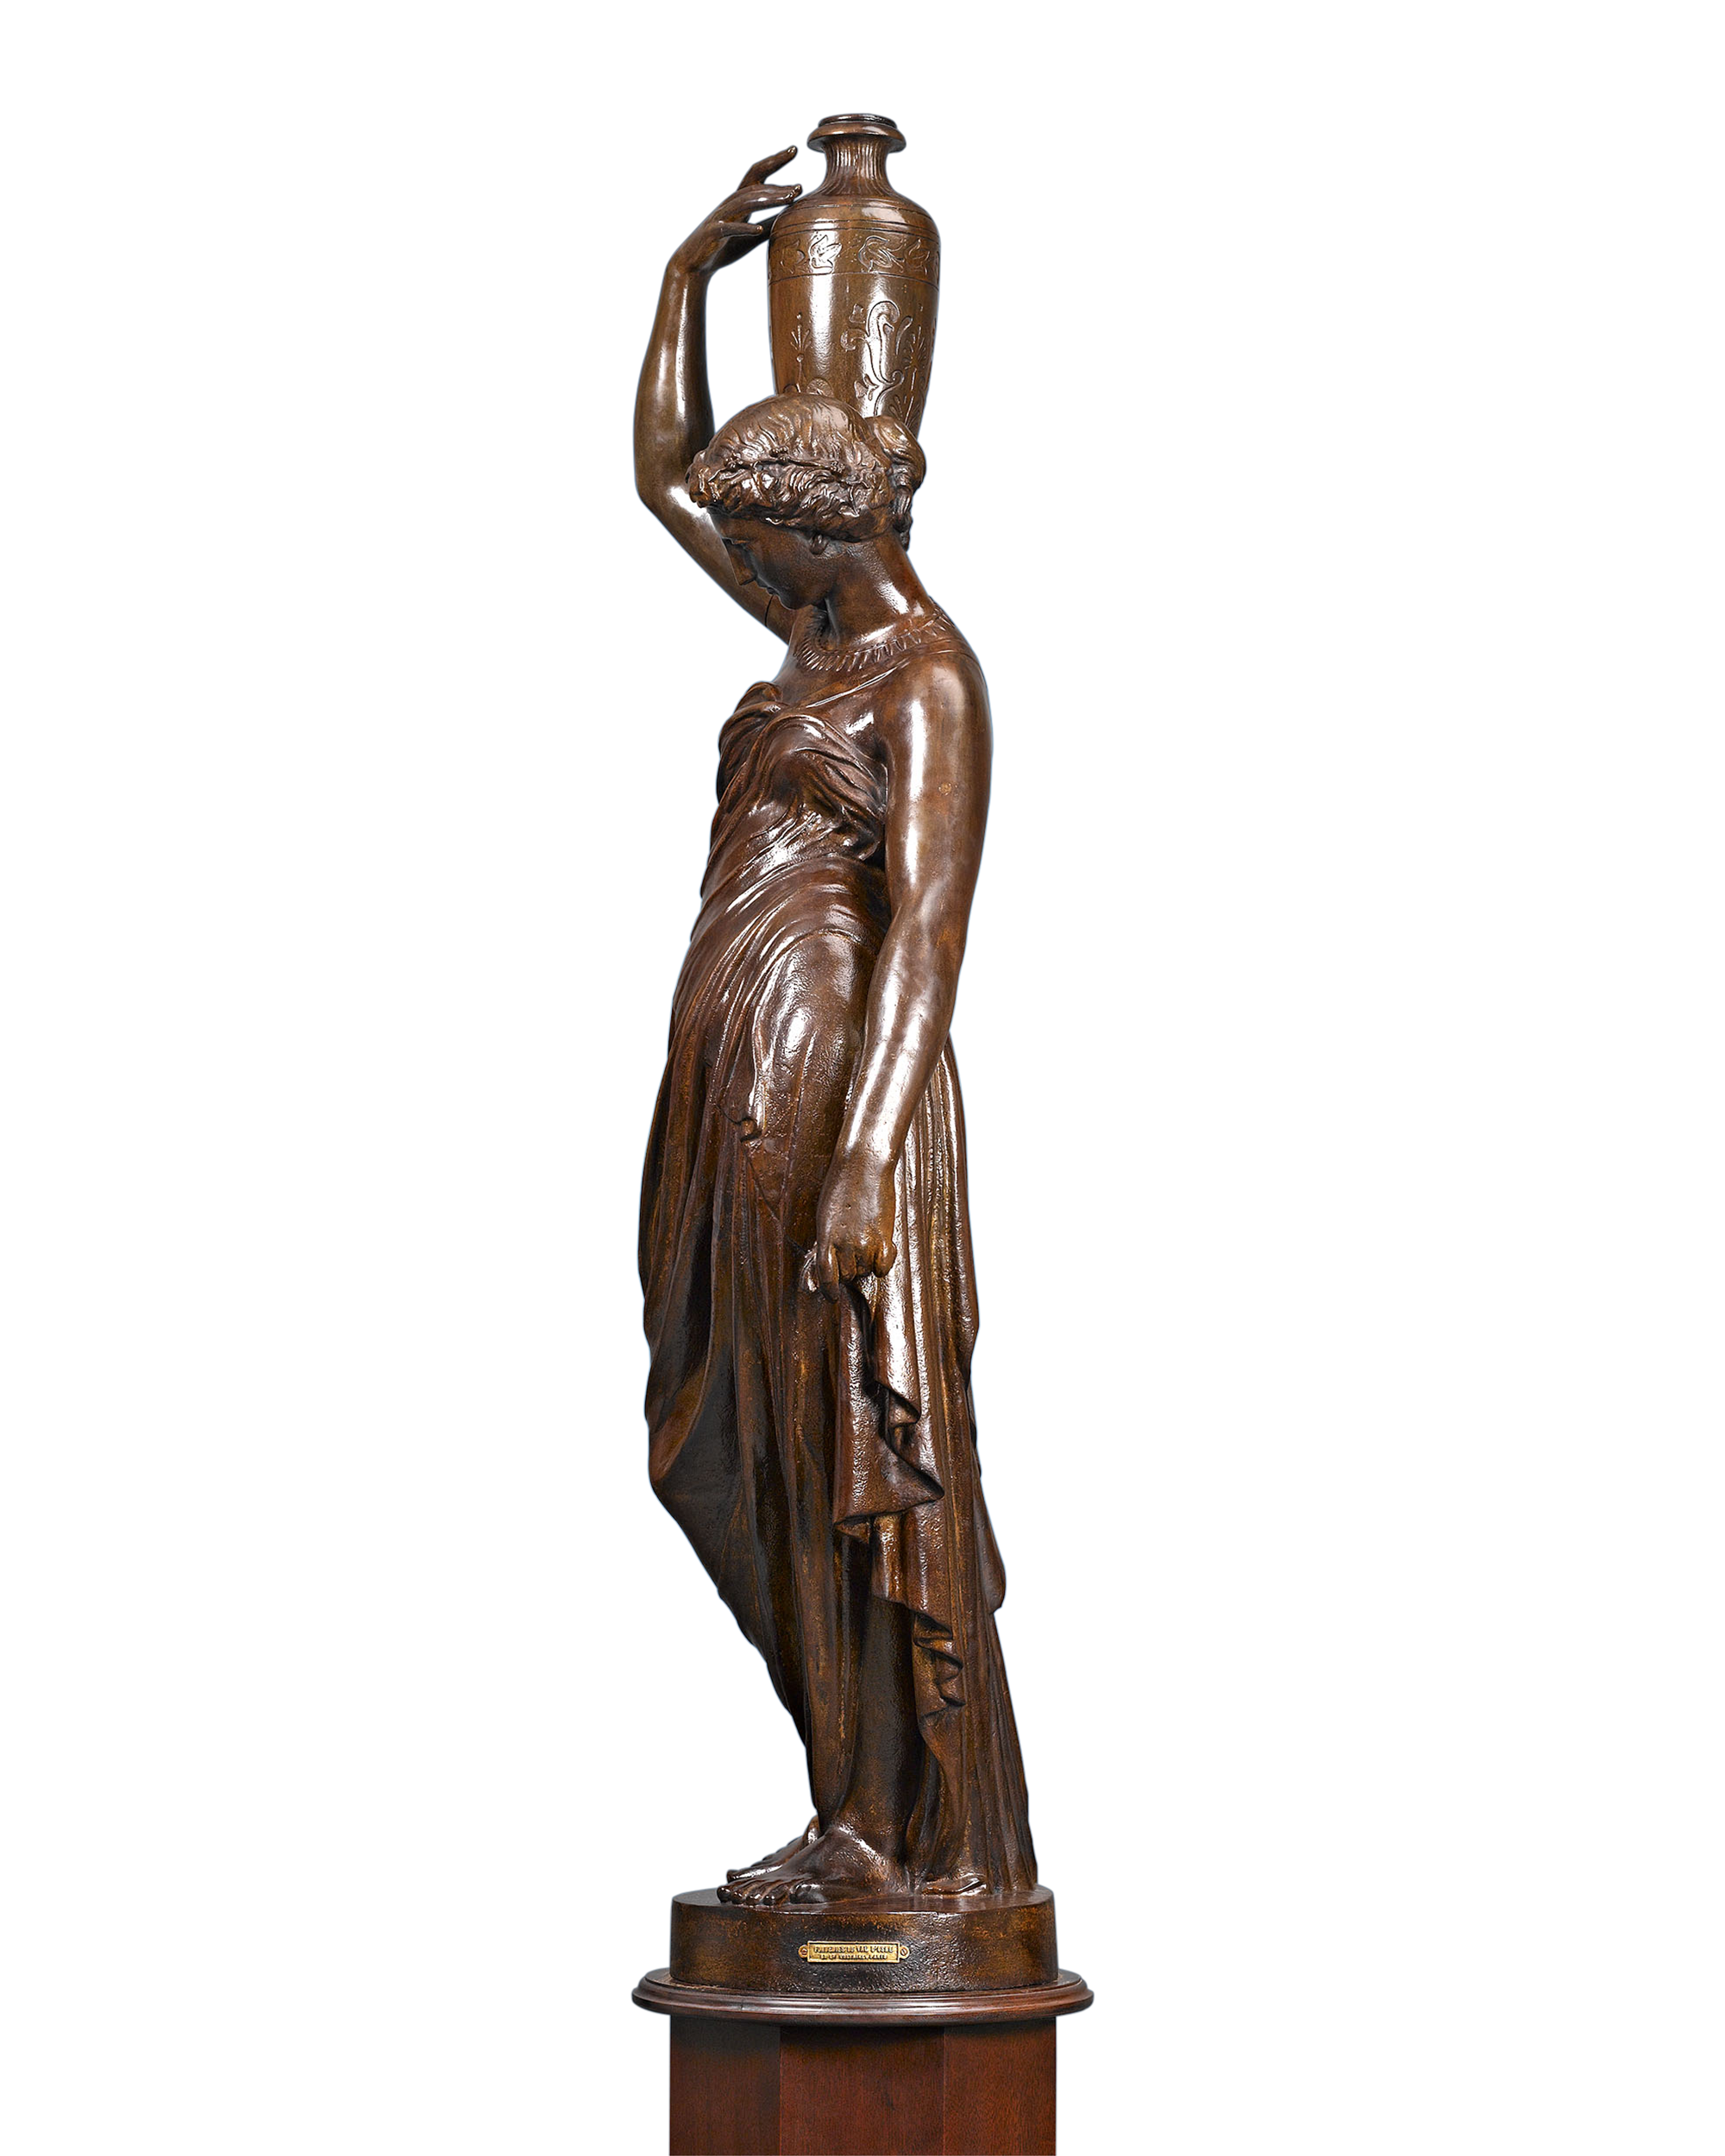 The design for this statue is reproduced in the catalog of the Fonderies Du Val D'Osne